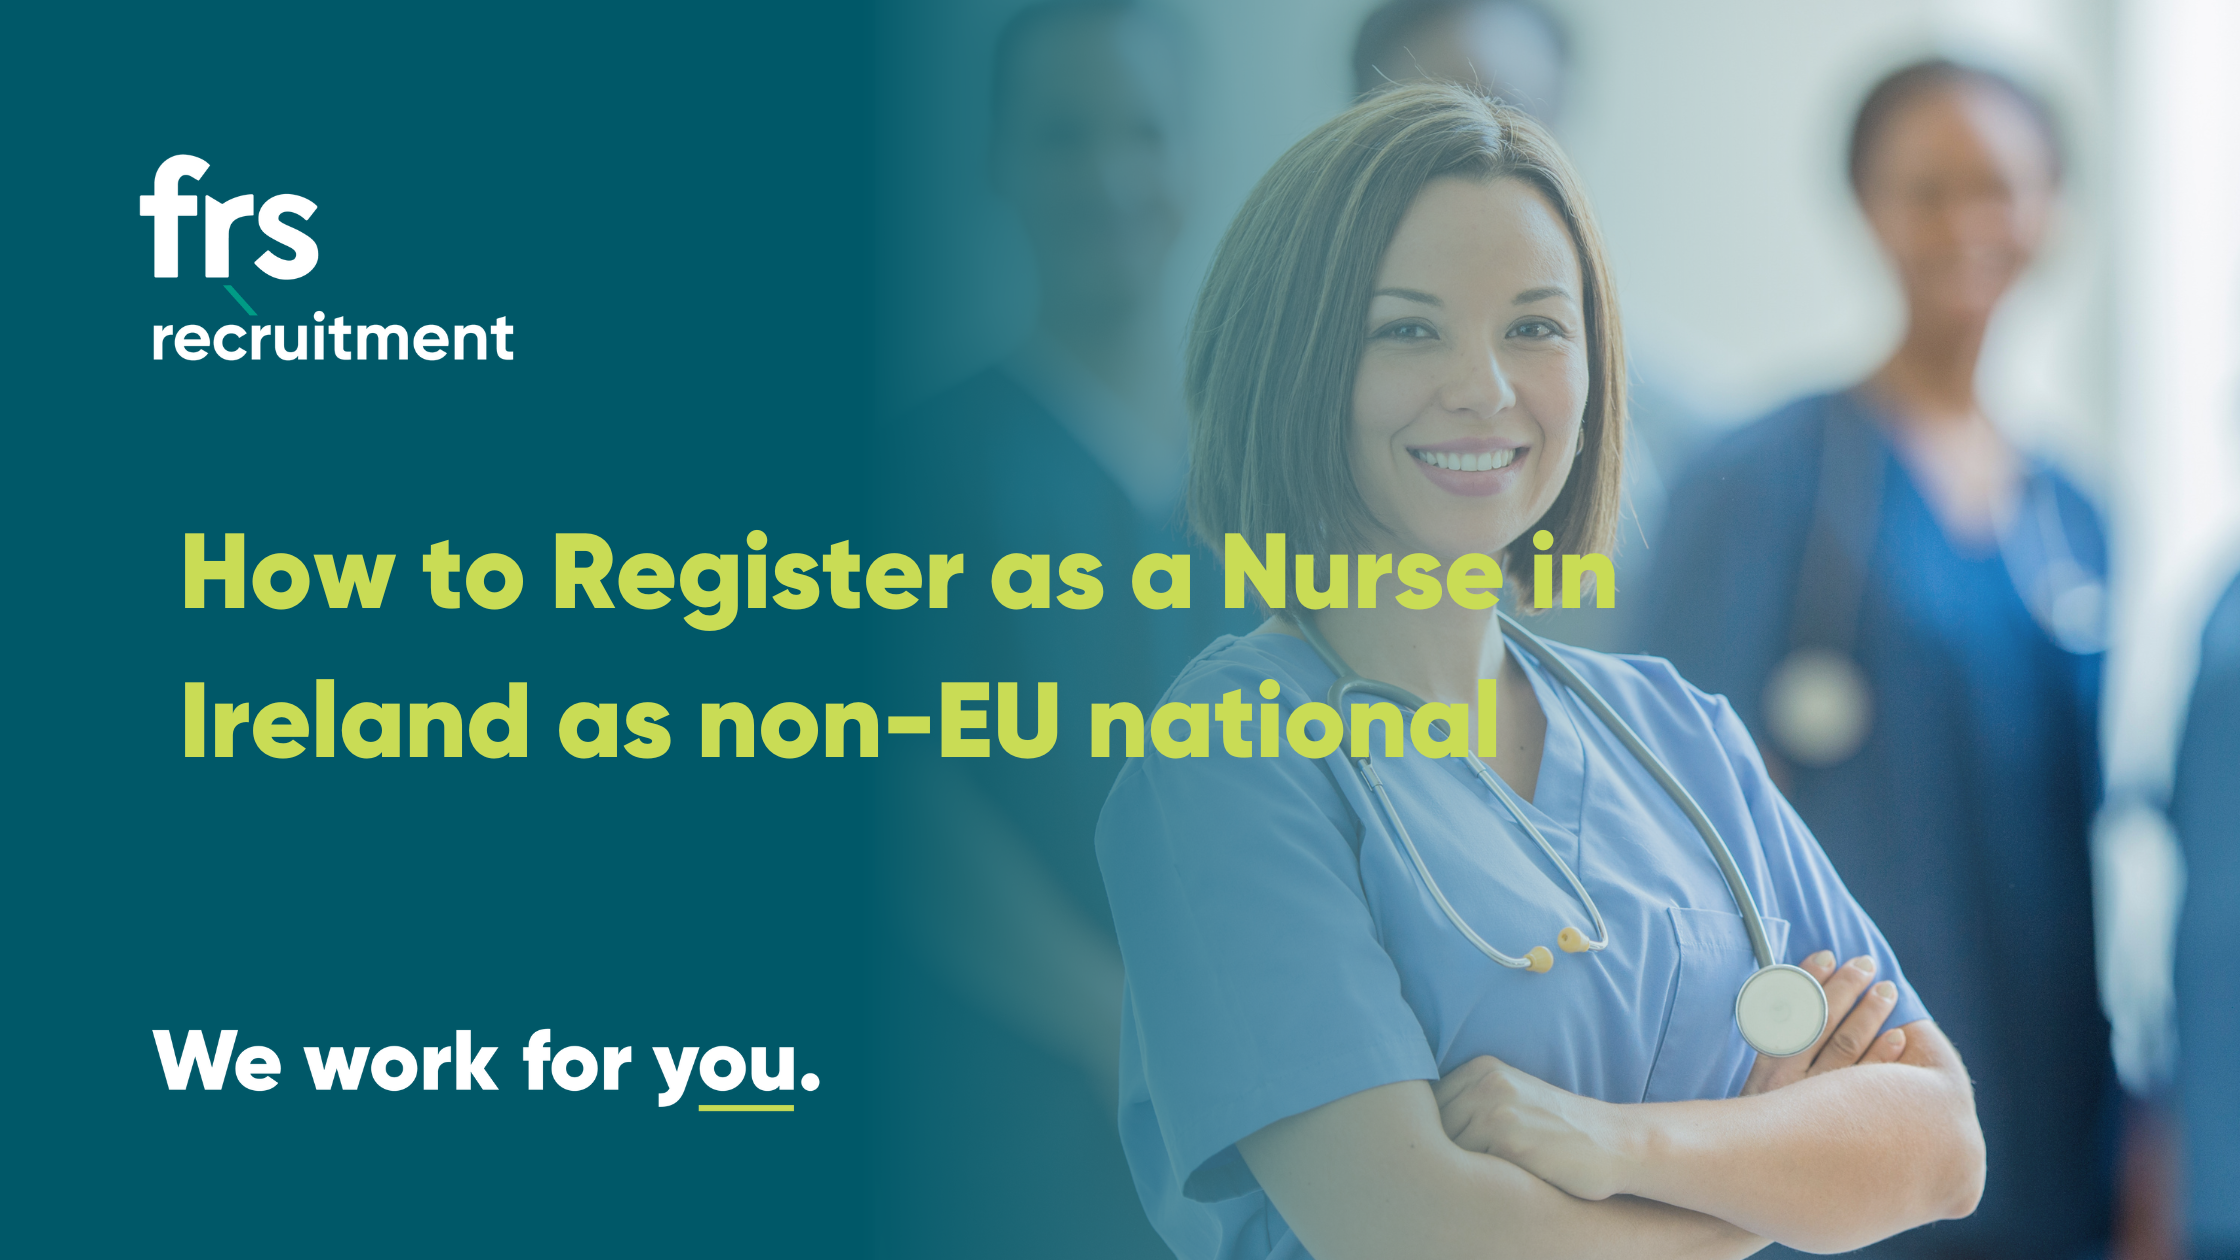 How to register as a Nurse in Ireland for Non-EU Nationals